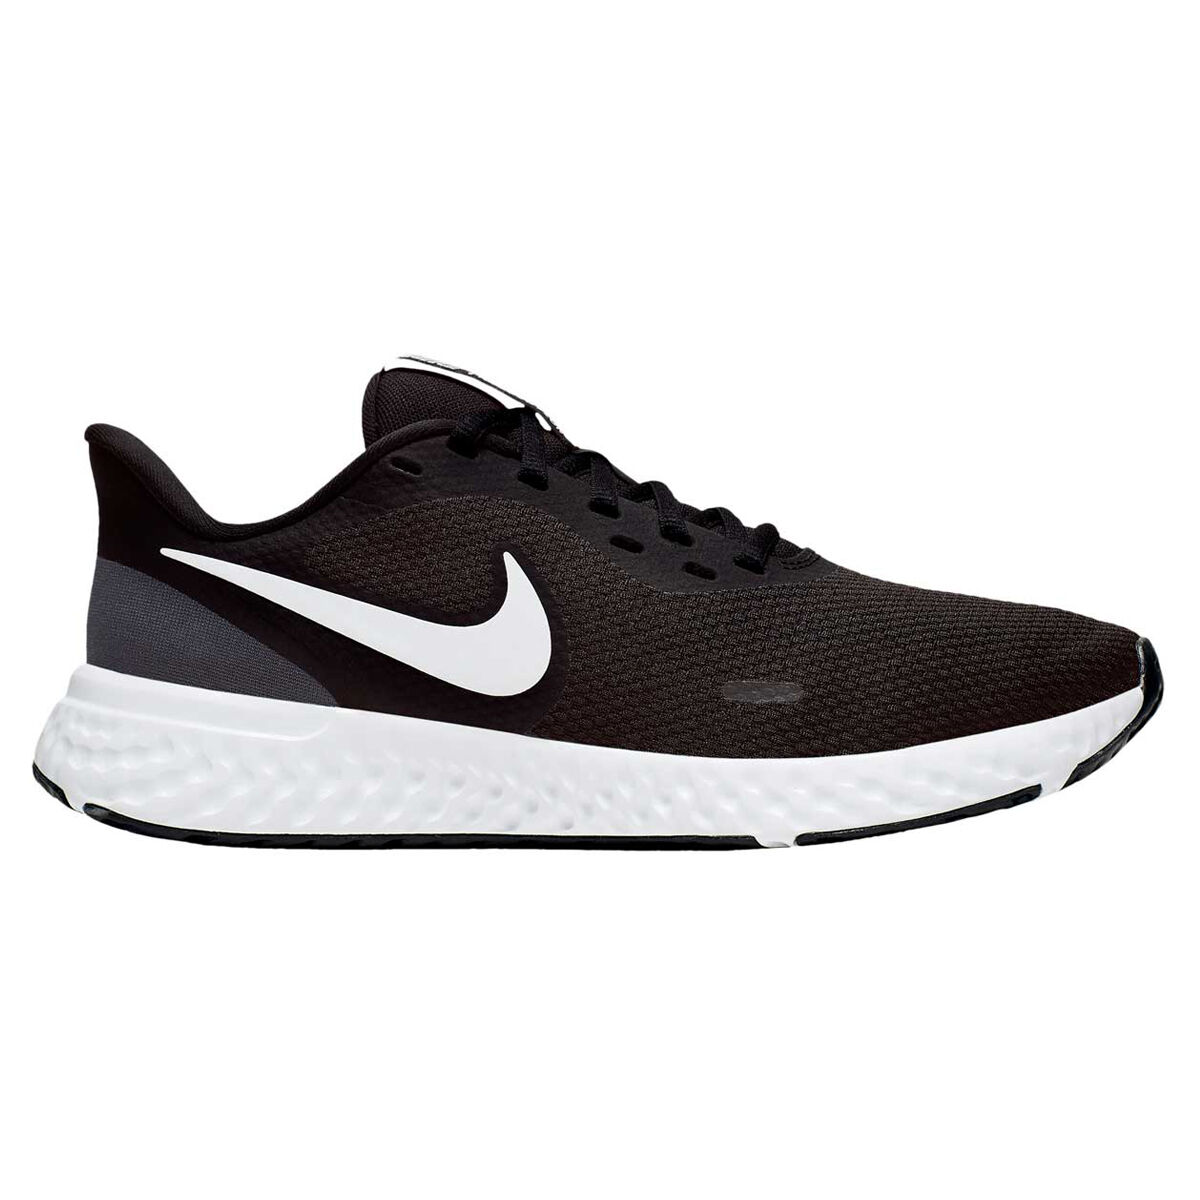 nike womens running shoes black and white